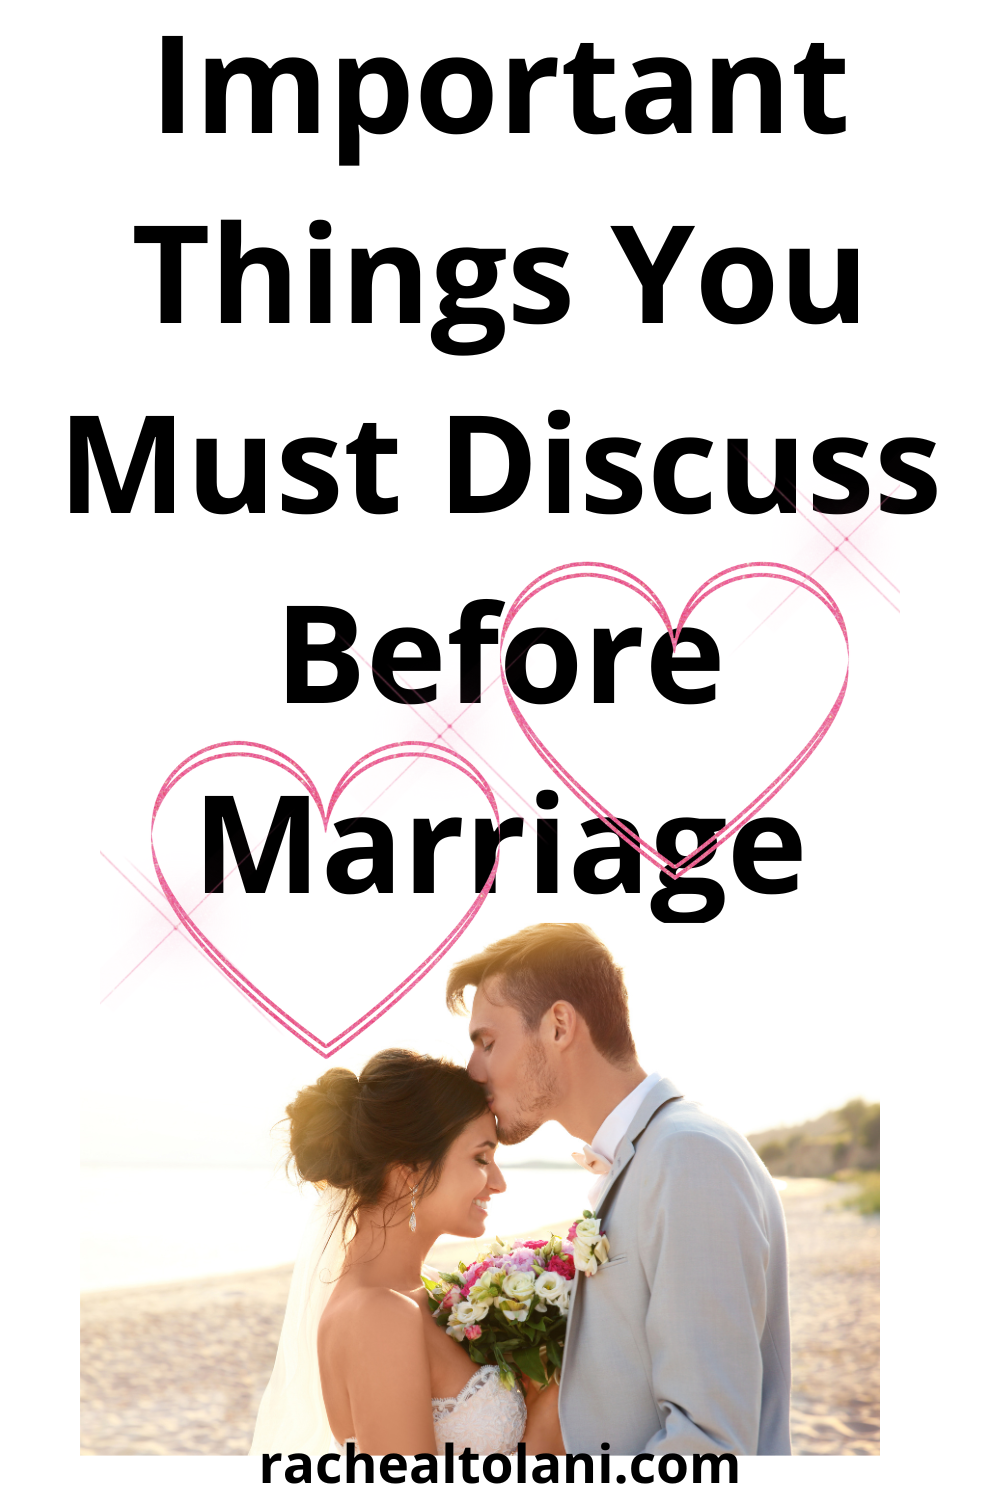 Things you must discuss before marriage